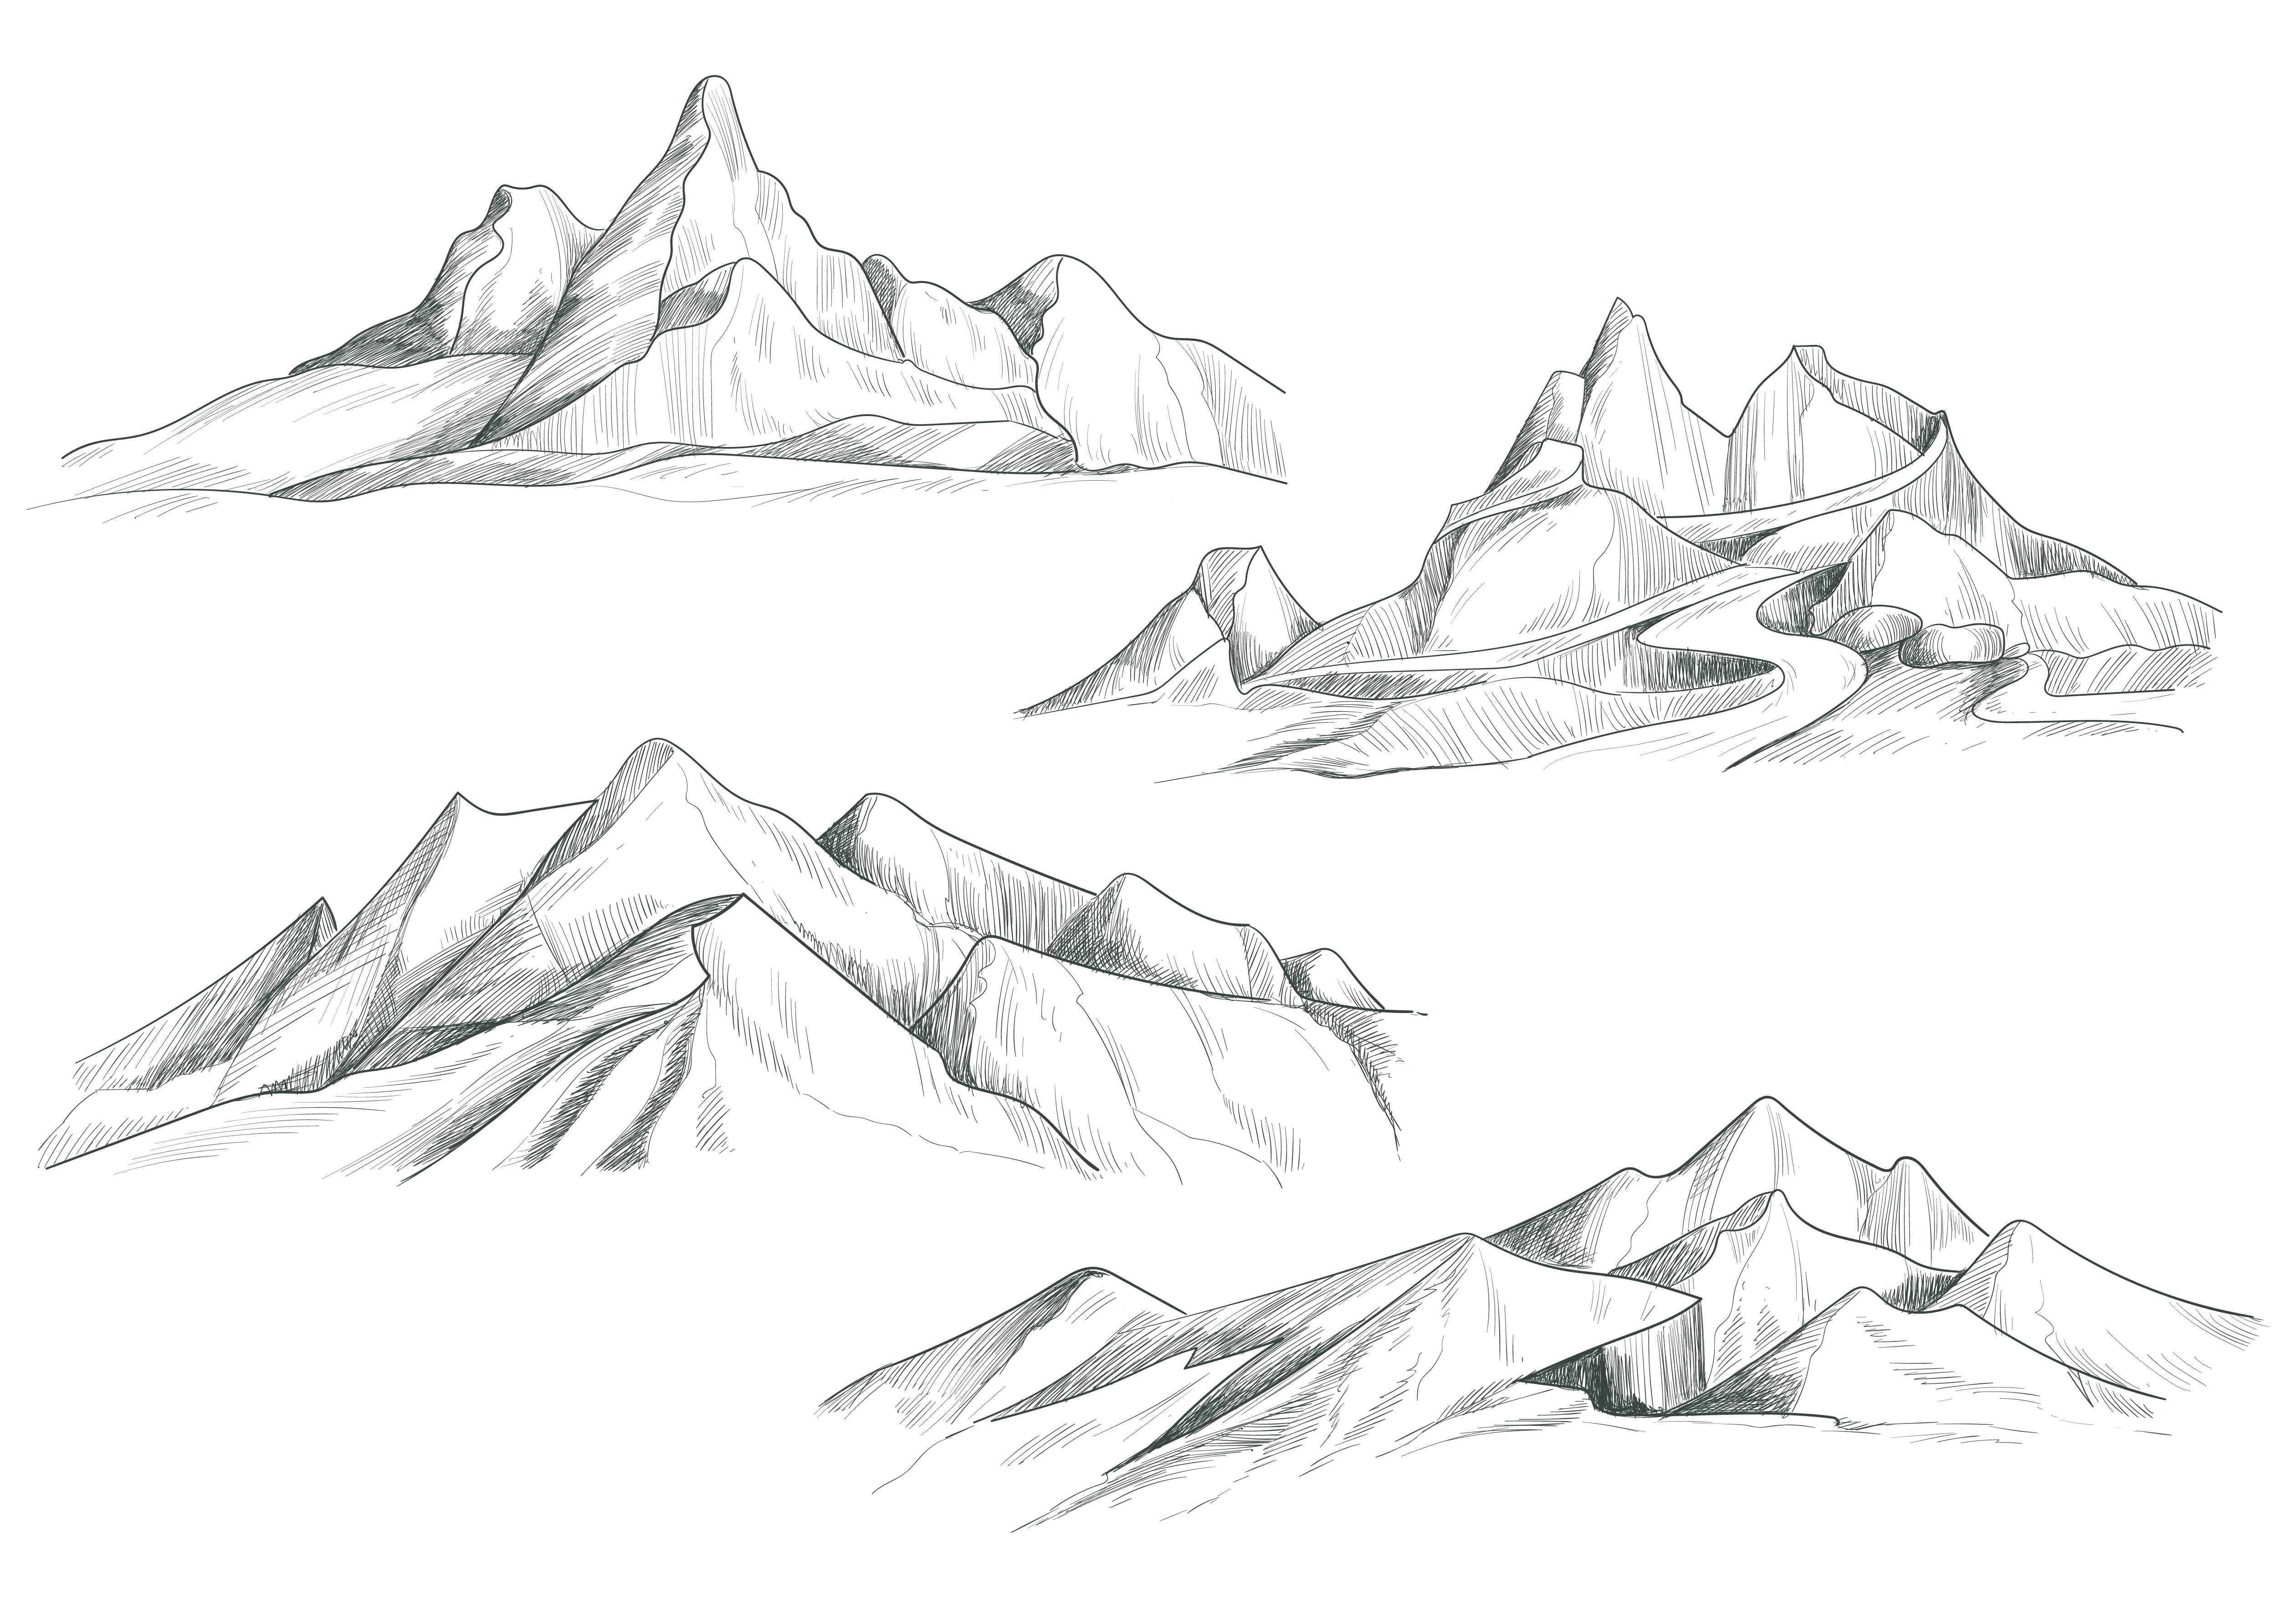 Mountain Landscape Sketch Small Alpine Resort Royalty Free Cliparts  Vectors And Stock Illustration I  Landscape sketch Landscape drawings Mountain  landscape